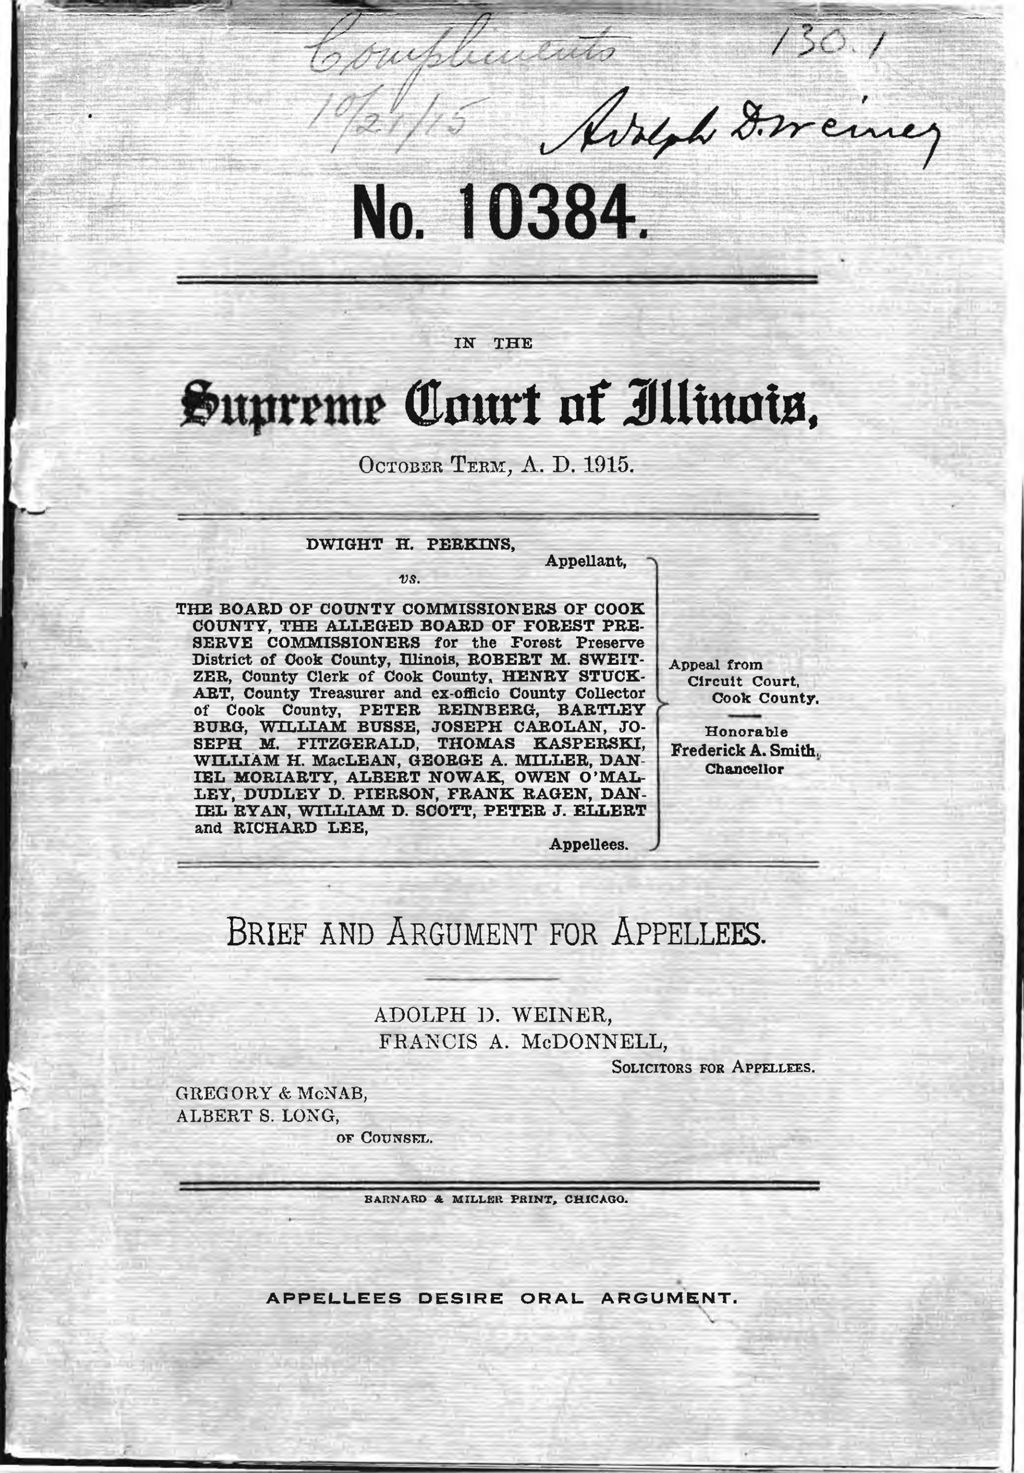 Miniature of Brief and Argument for Appellees, Perkins v. Board of County Commissioners, 1915.